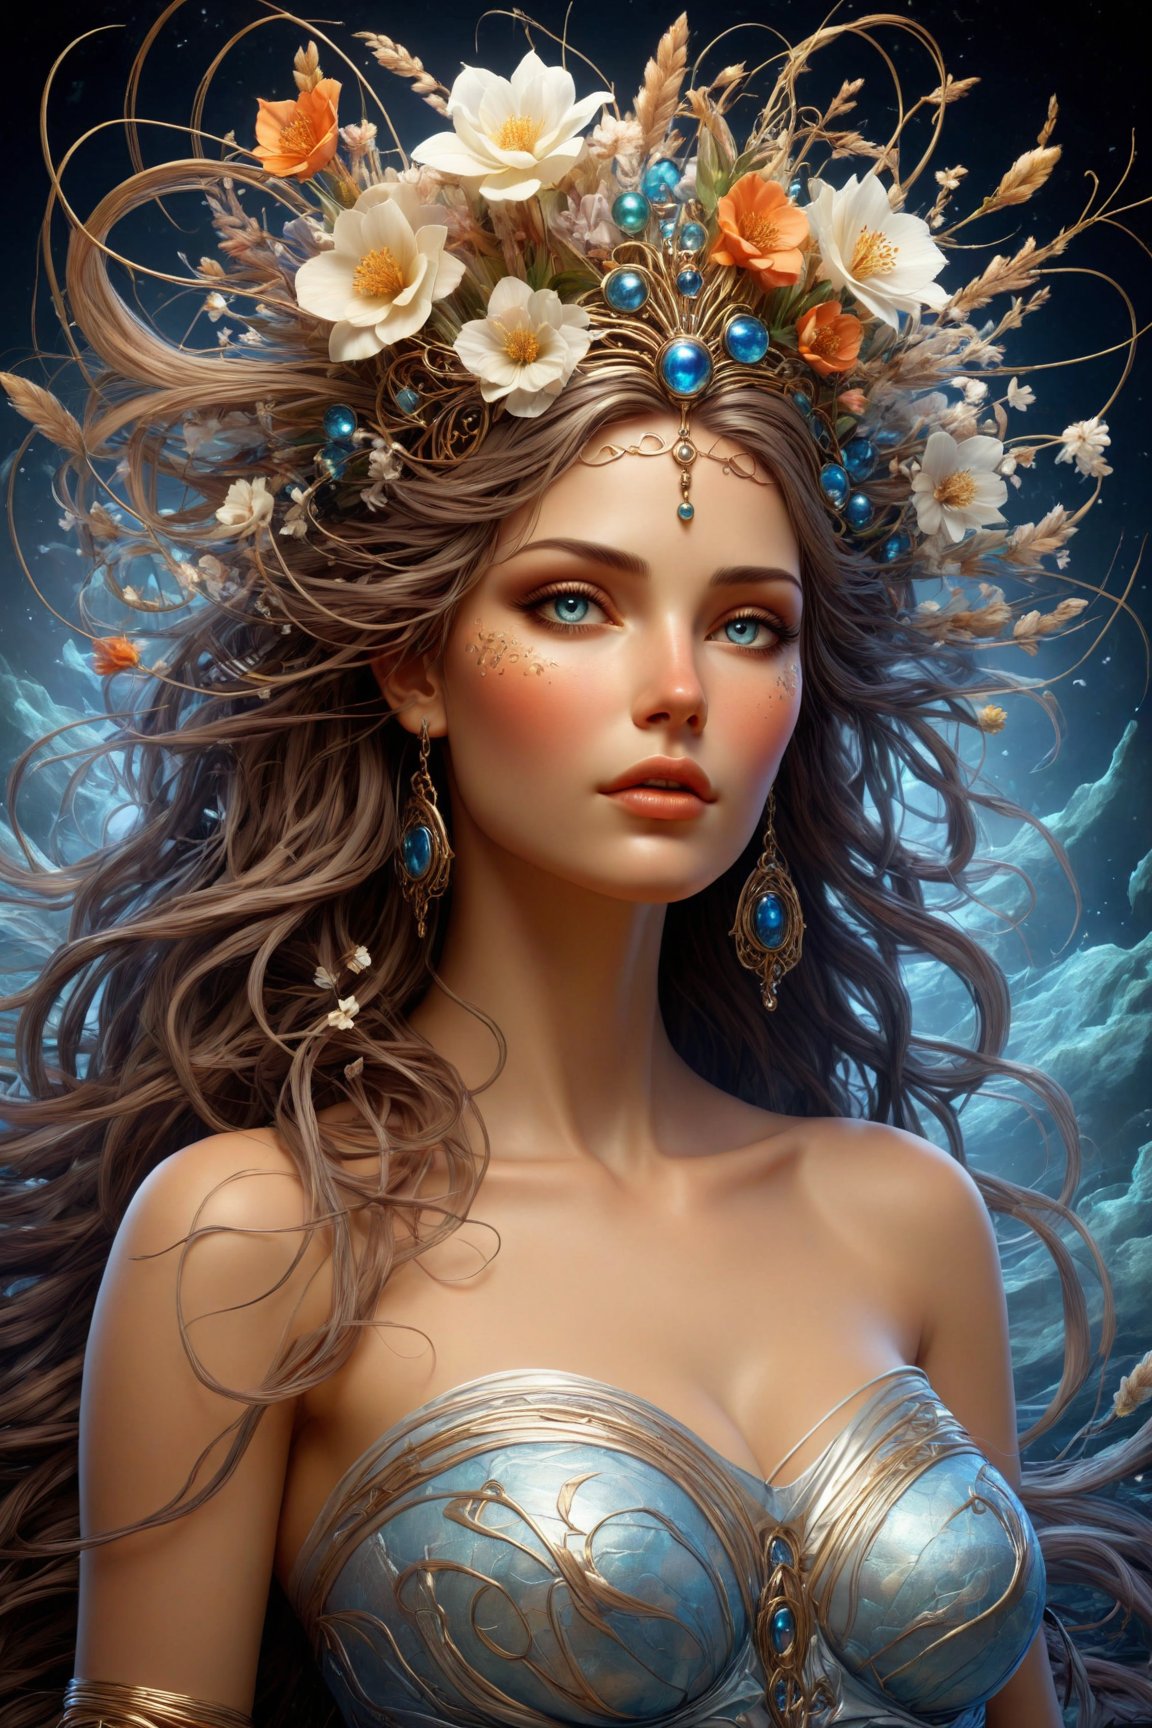 Create an organic goddess with gorgeous flowers woven into her hair, featuring holographic white plastic and fin elements. The scene should be set in a fantasy realm, characterized by intricate, elegant, and highly detailed features. Strive for a realistic and photorealistic digital painting style. The artwork should evoke the styles of Scott Davidson, Albert Auble, Krentz Kushart, Artem Demura, and Alphonse Mucha, and be suitable for trending on Artstation. Ensure the image is smooth, with clear focus, and rendered in 4k resolution for high quality. The goddess should have blue glowing eyes and the overall design should showcase headquarters-level clarity, crazy detail, and the feel of high-quality concept art